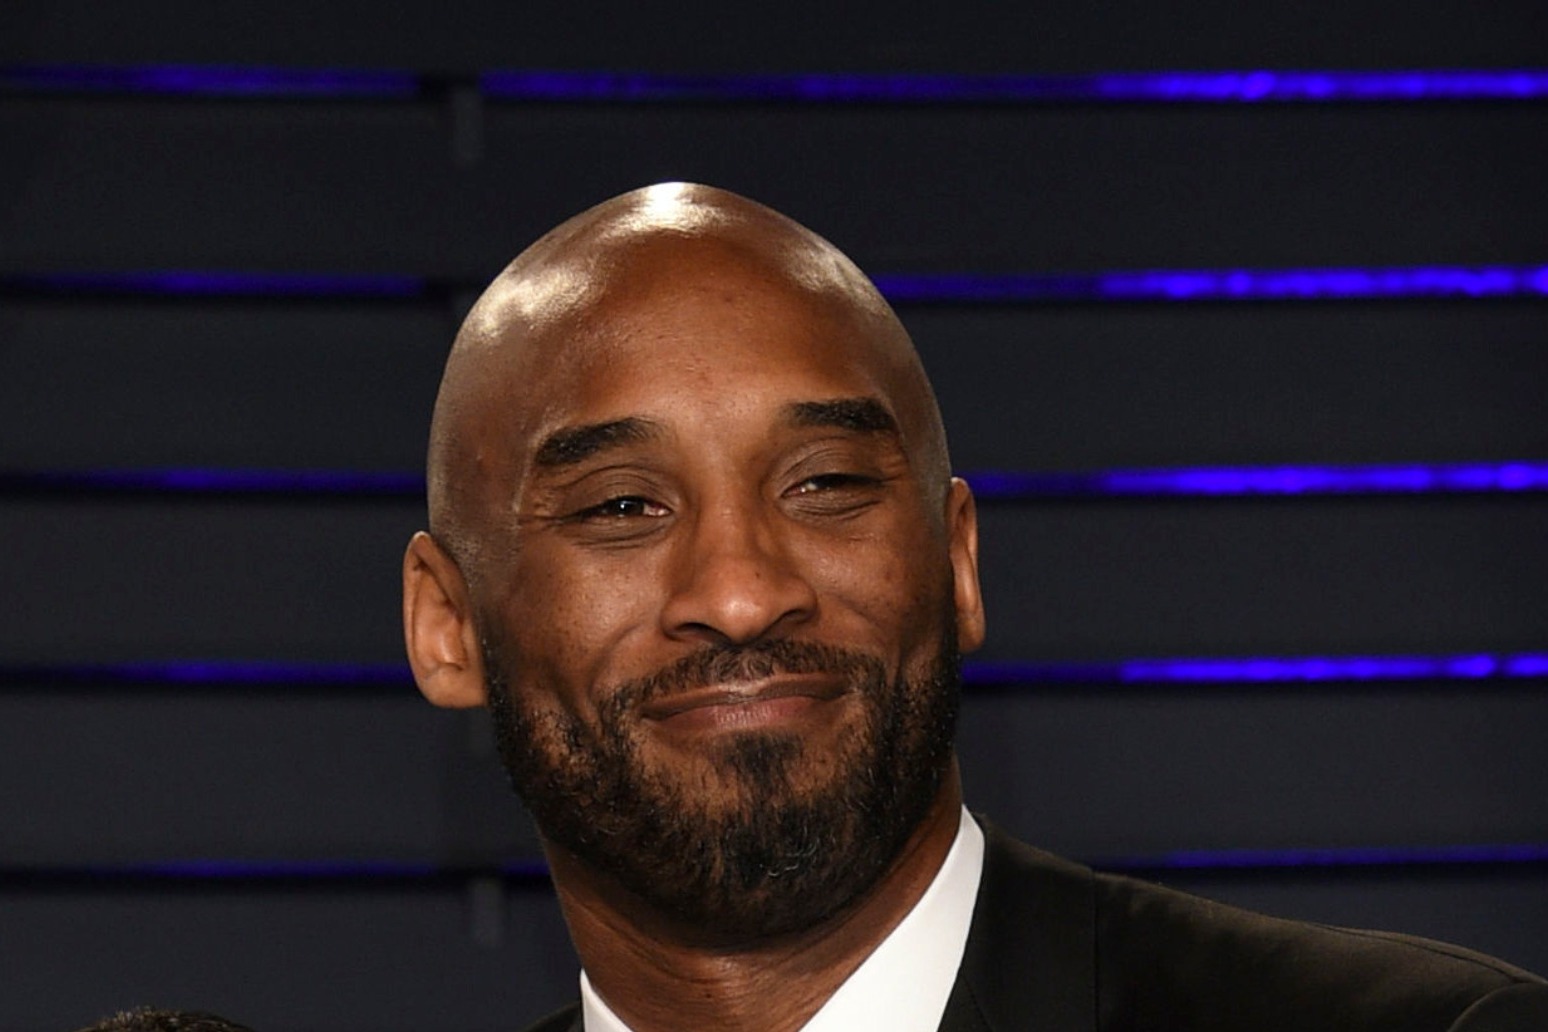 NBA legend Kobe Bryant and 13-year-old daughter die in helicopter crash 